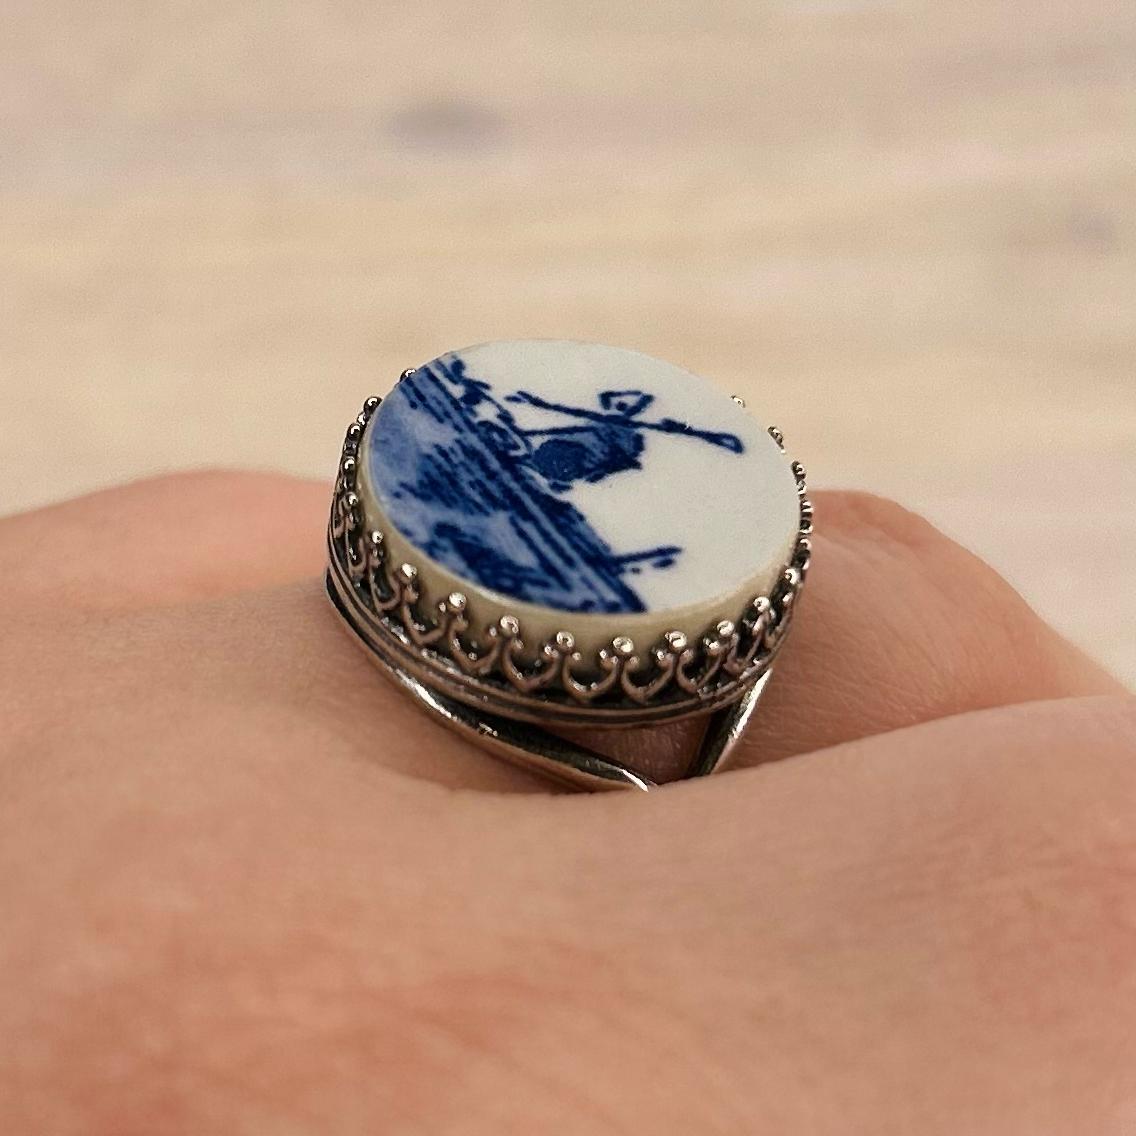 Delft Sterling Silver Ring